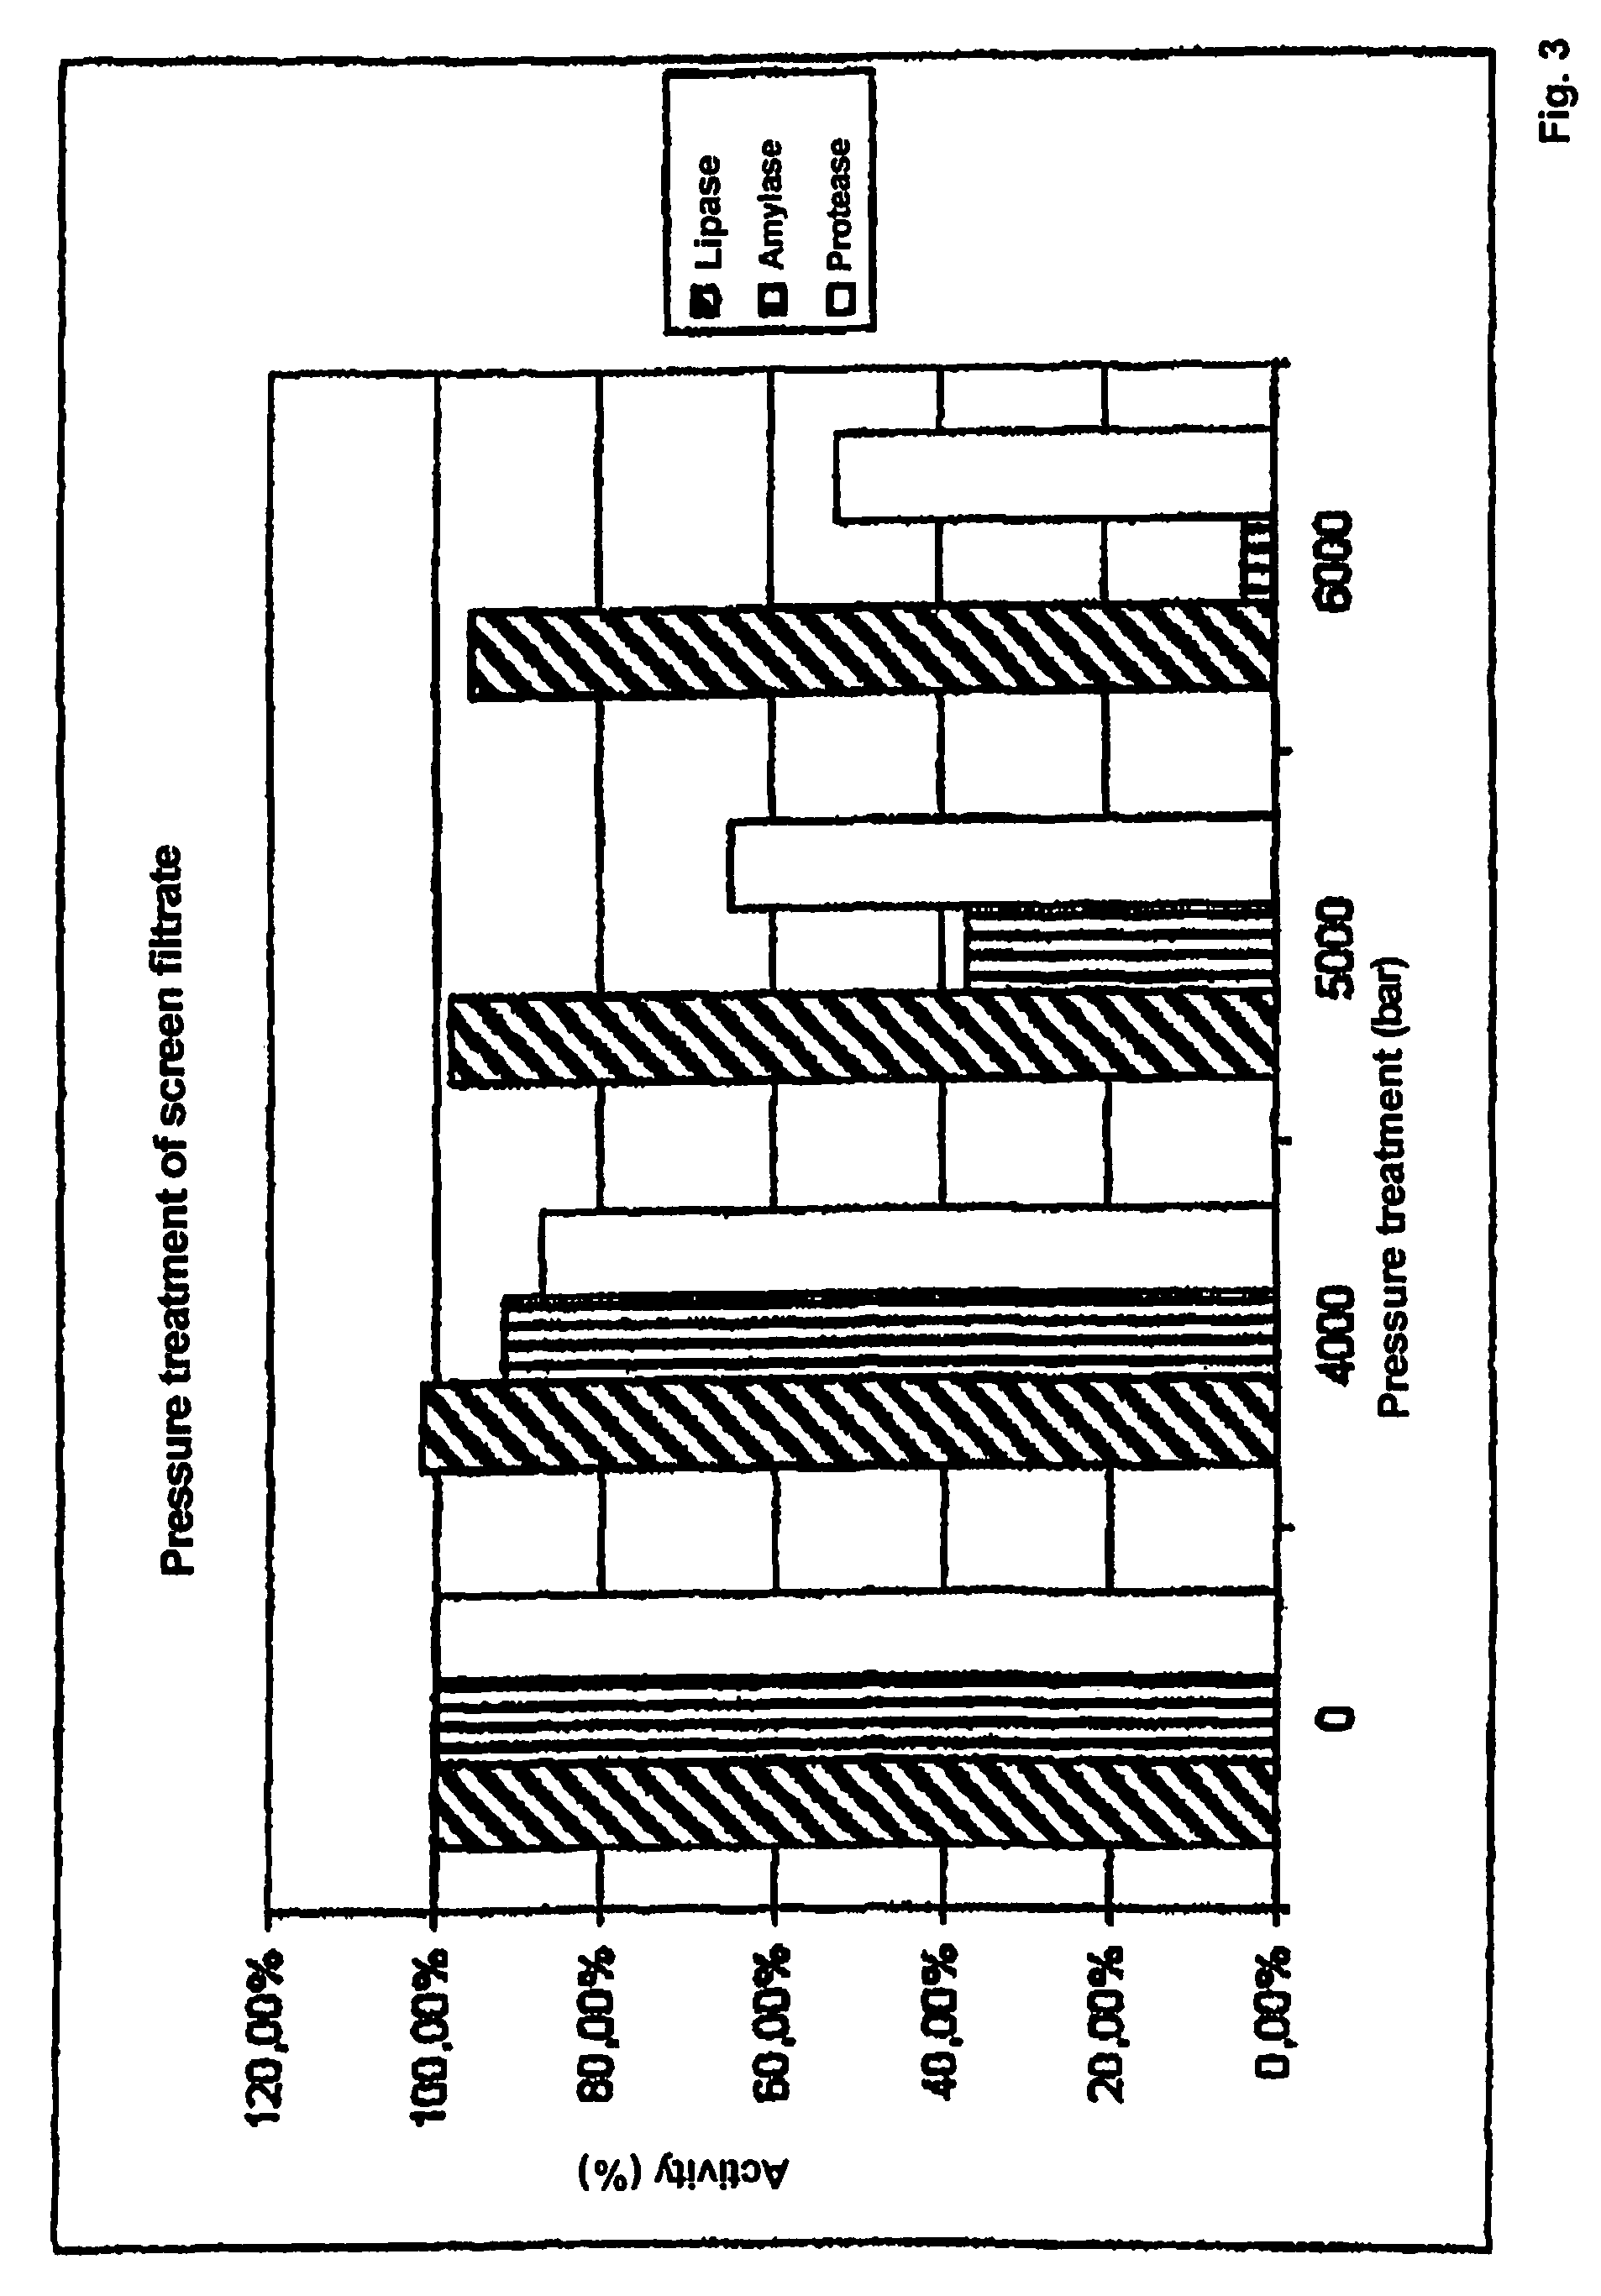 Method for reducing the viral and microbial load of biological extracts containing solids